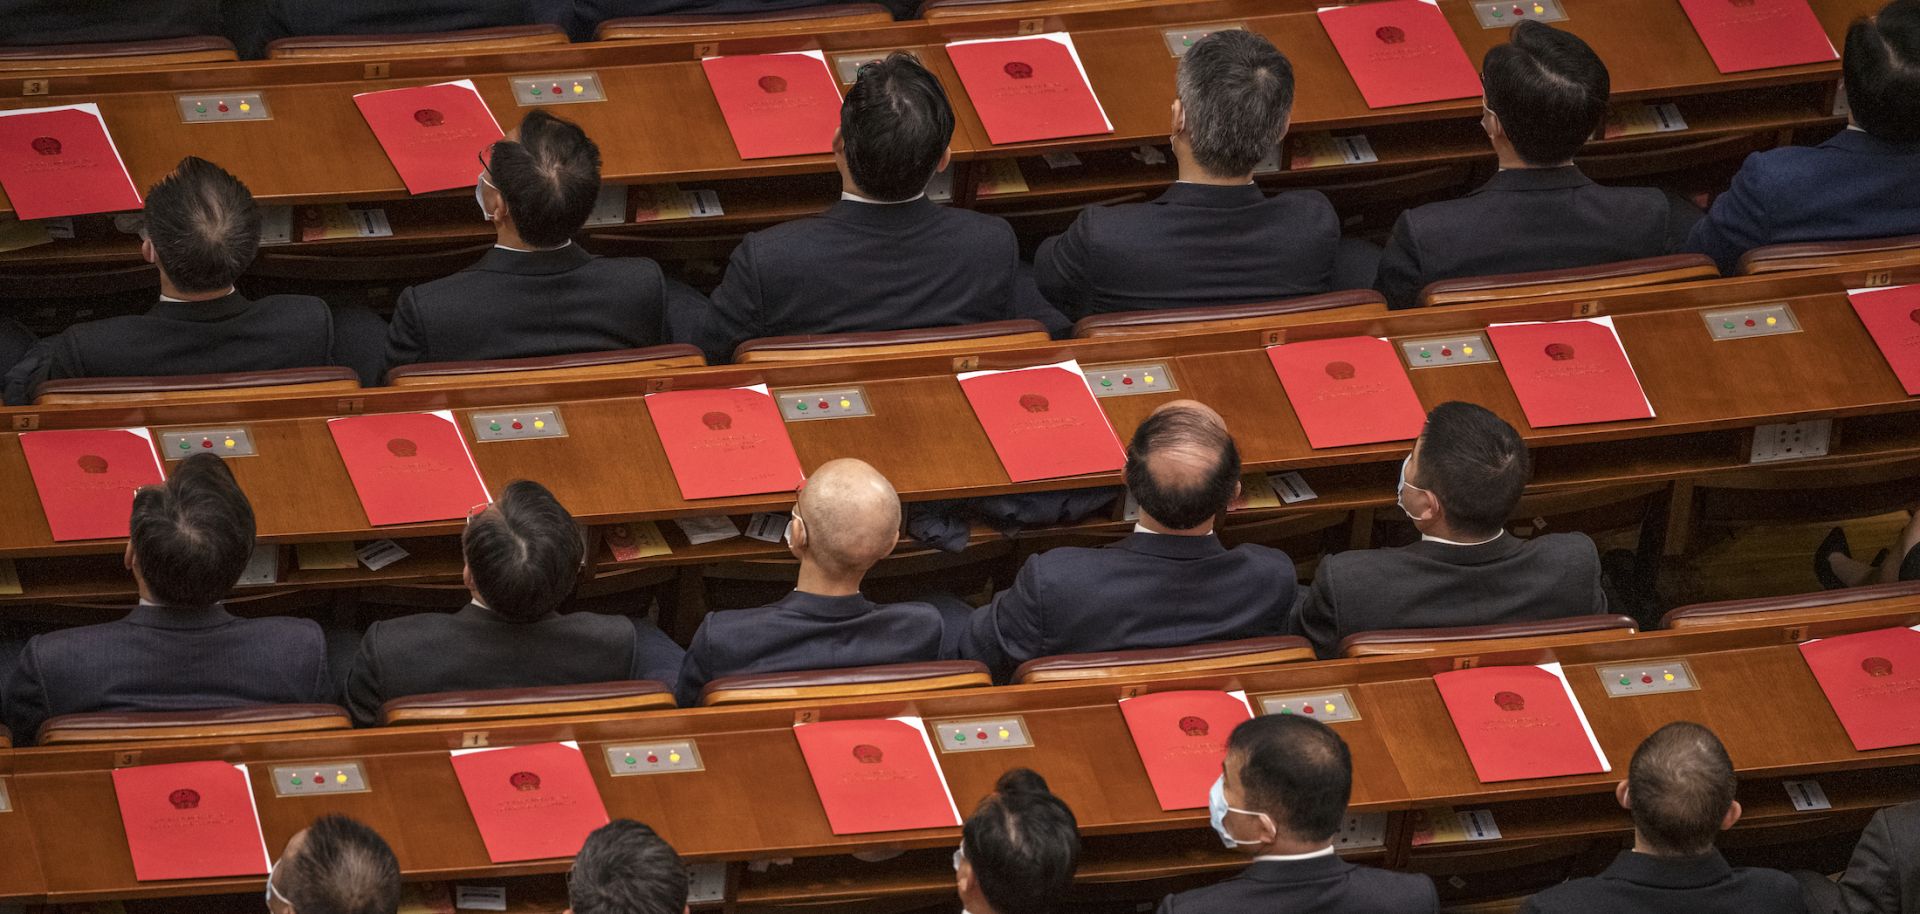 Delegates vote on resolutions during the closing session of China's National People's Congress on March 11, 2021.